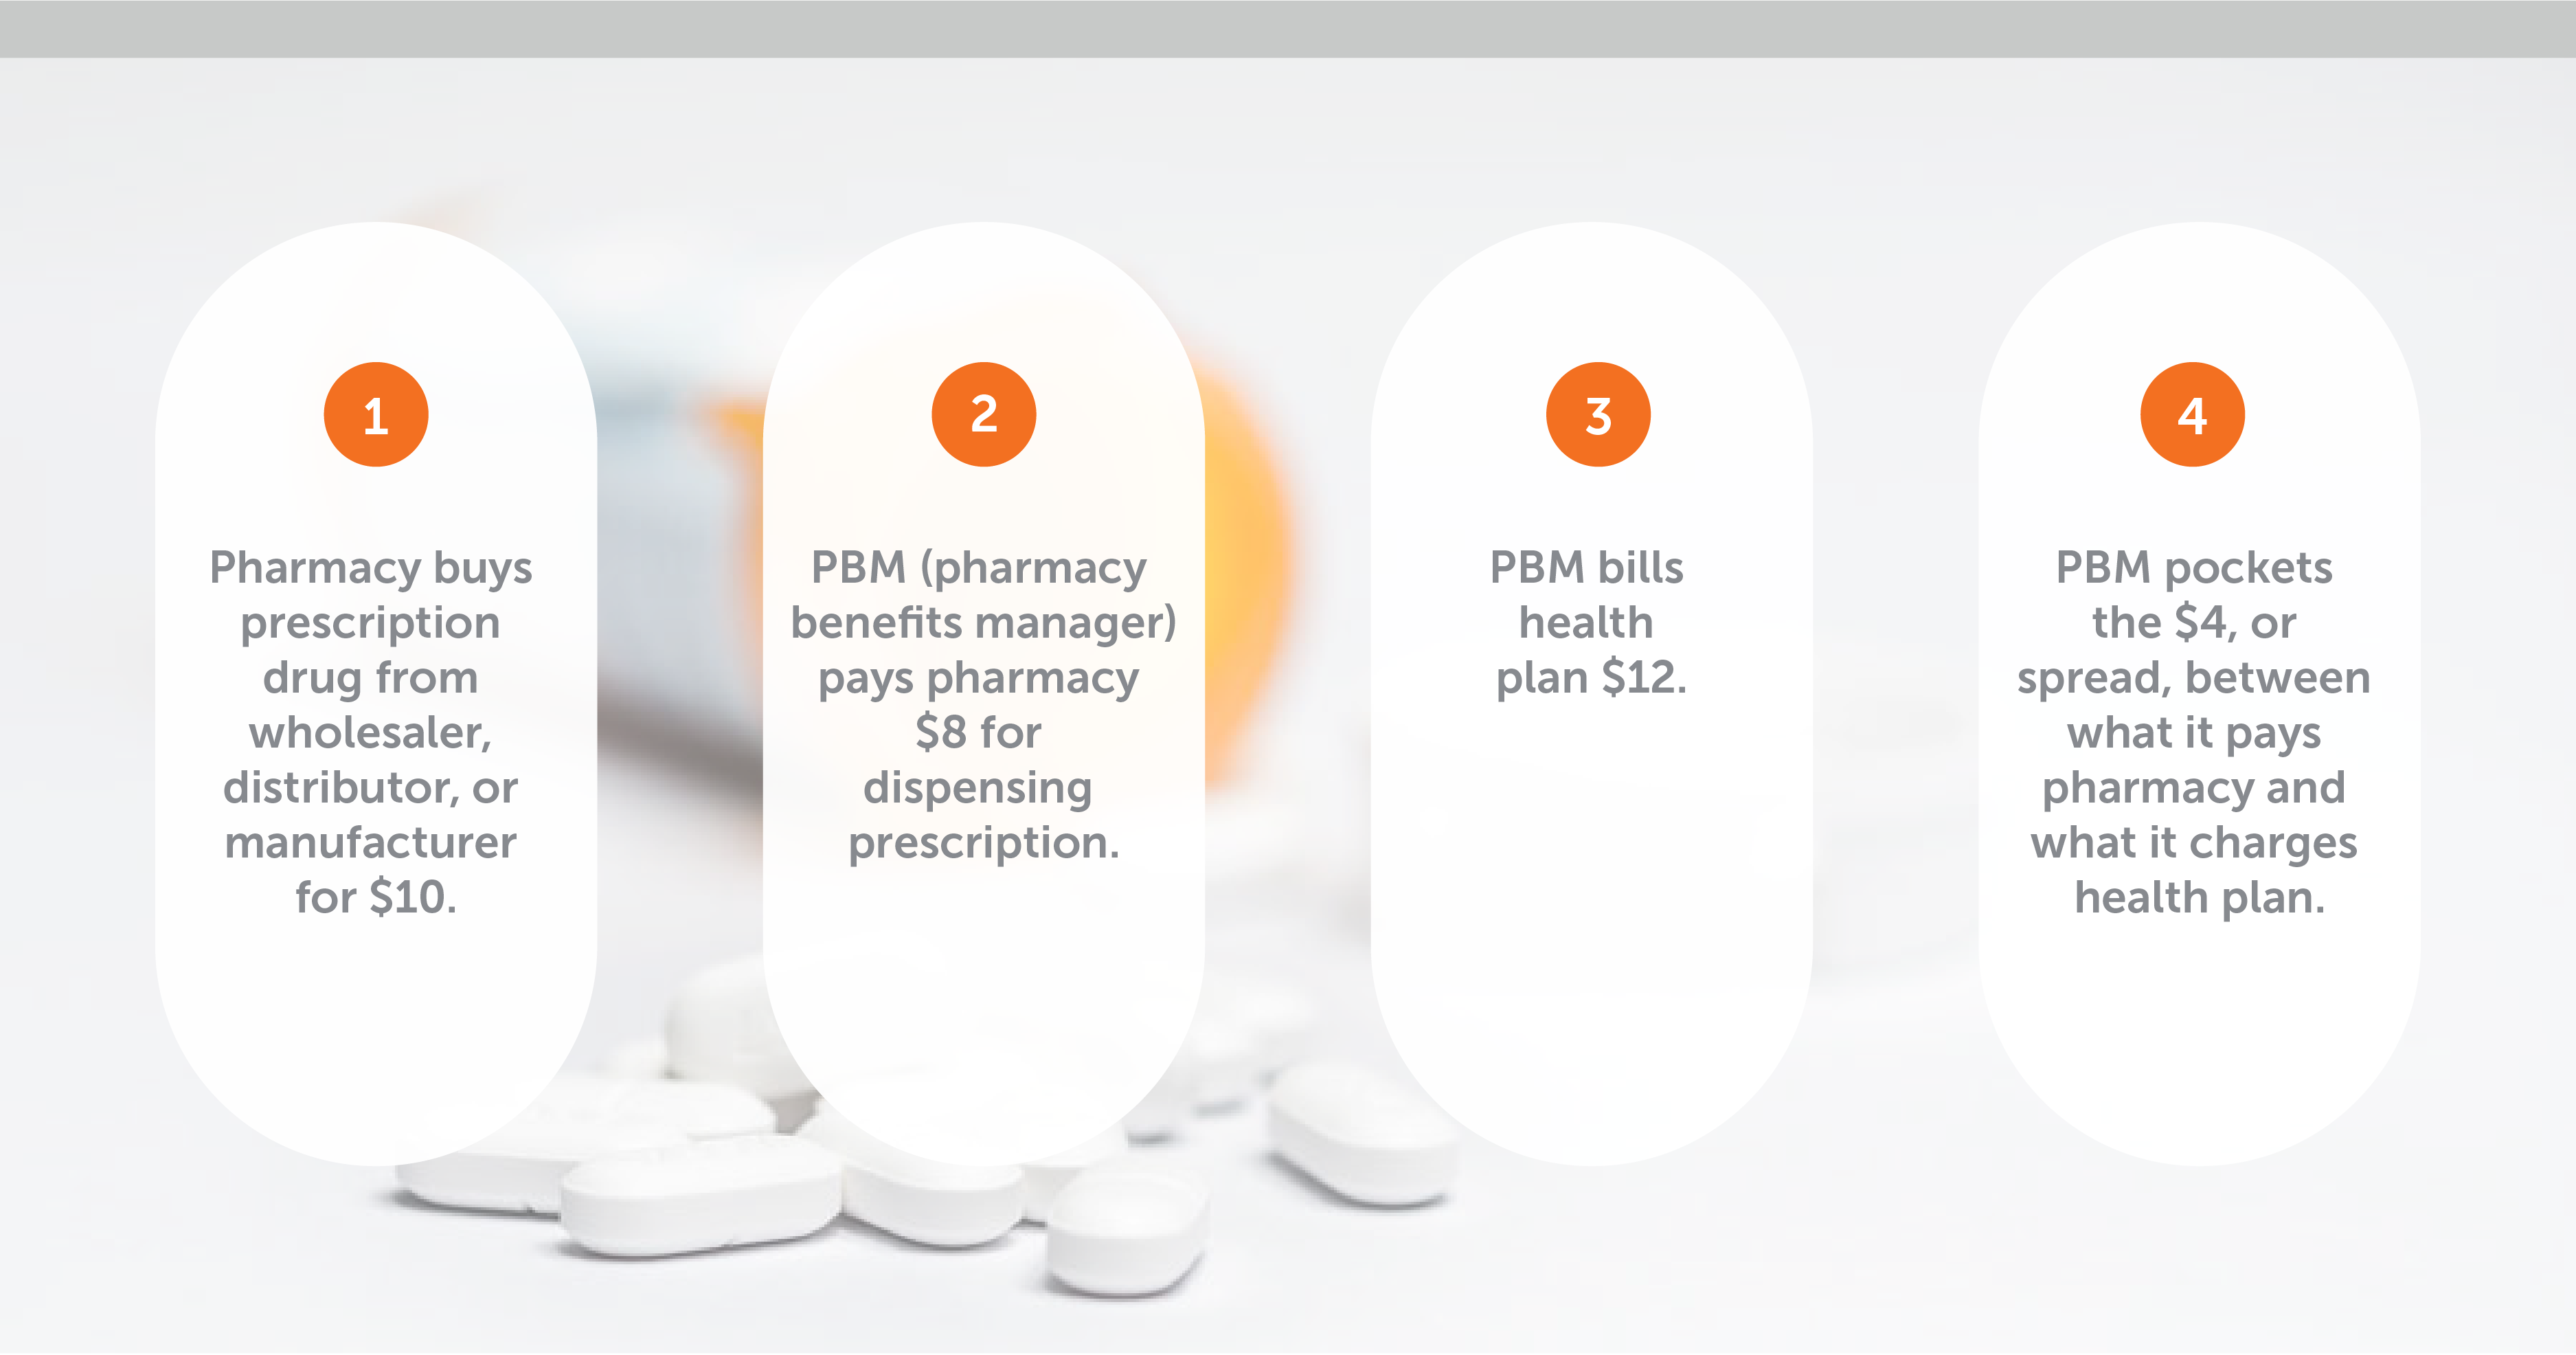 An infographic that shows how spread pricing works, from initial purchase from the manufacturer to what a PBM pockets and how it affects a health plan.